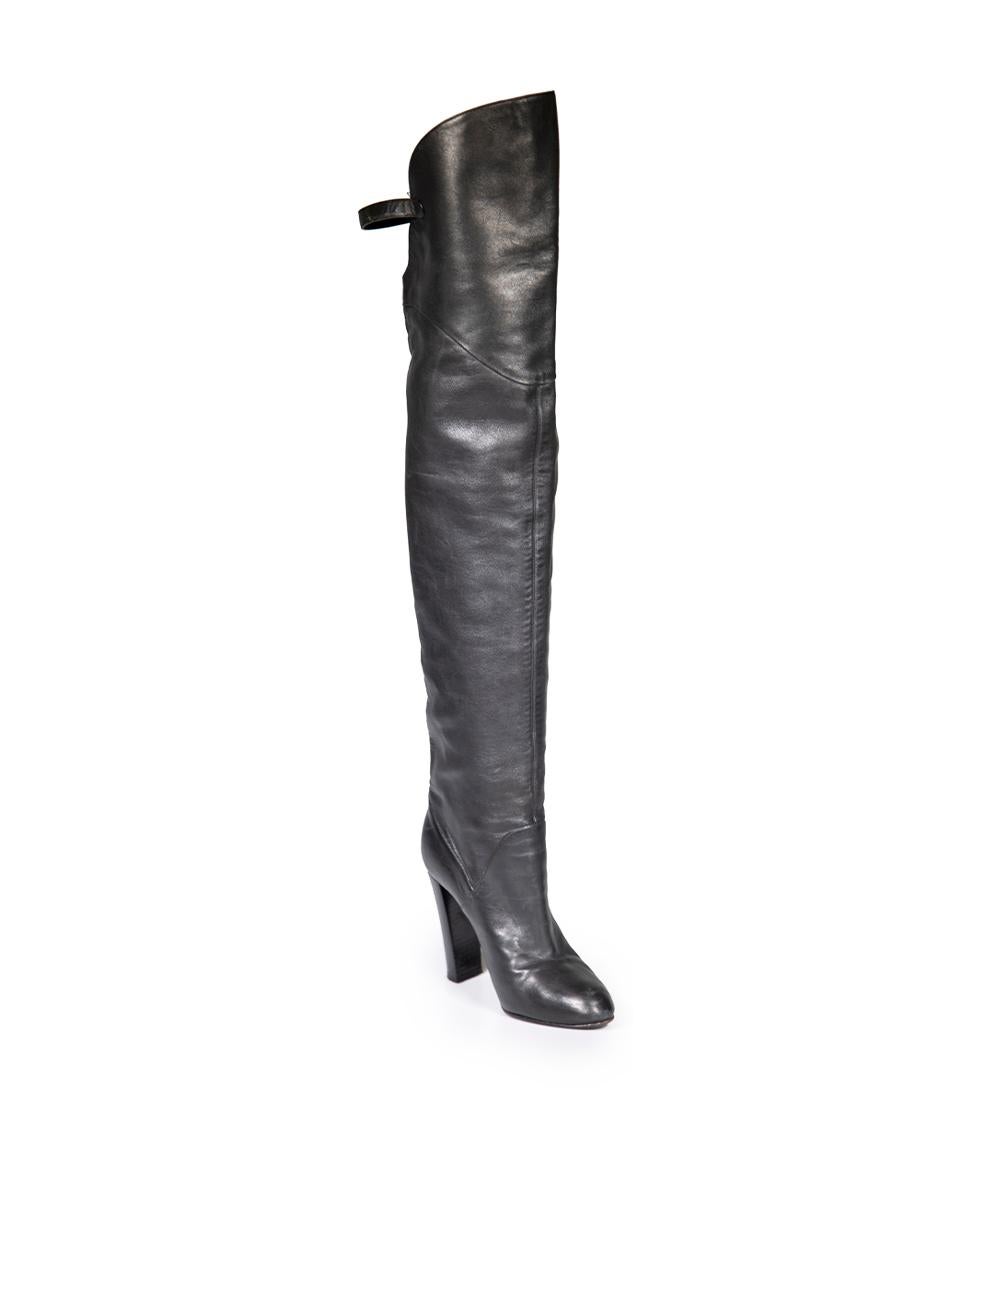 CONDITION is Good. Minor wear to boots is evident. Light wear to both sides, toes and heels of both boots with abrasions on this used Sergio Rossi designer resale item.
 
 Details
 Black
 Leather
 Thigh high boots
 Almond toe
 High heeled
 Back